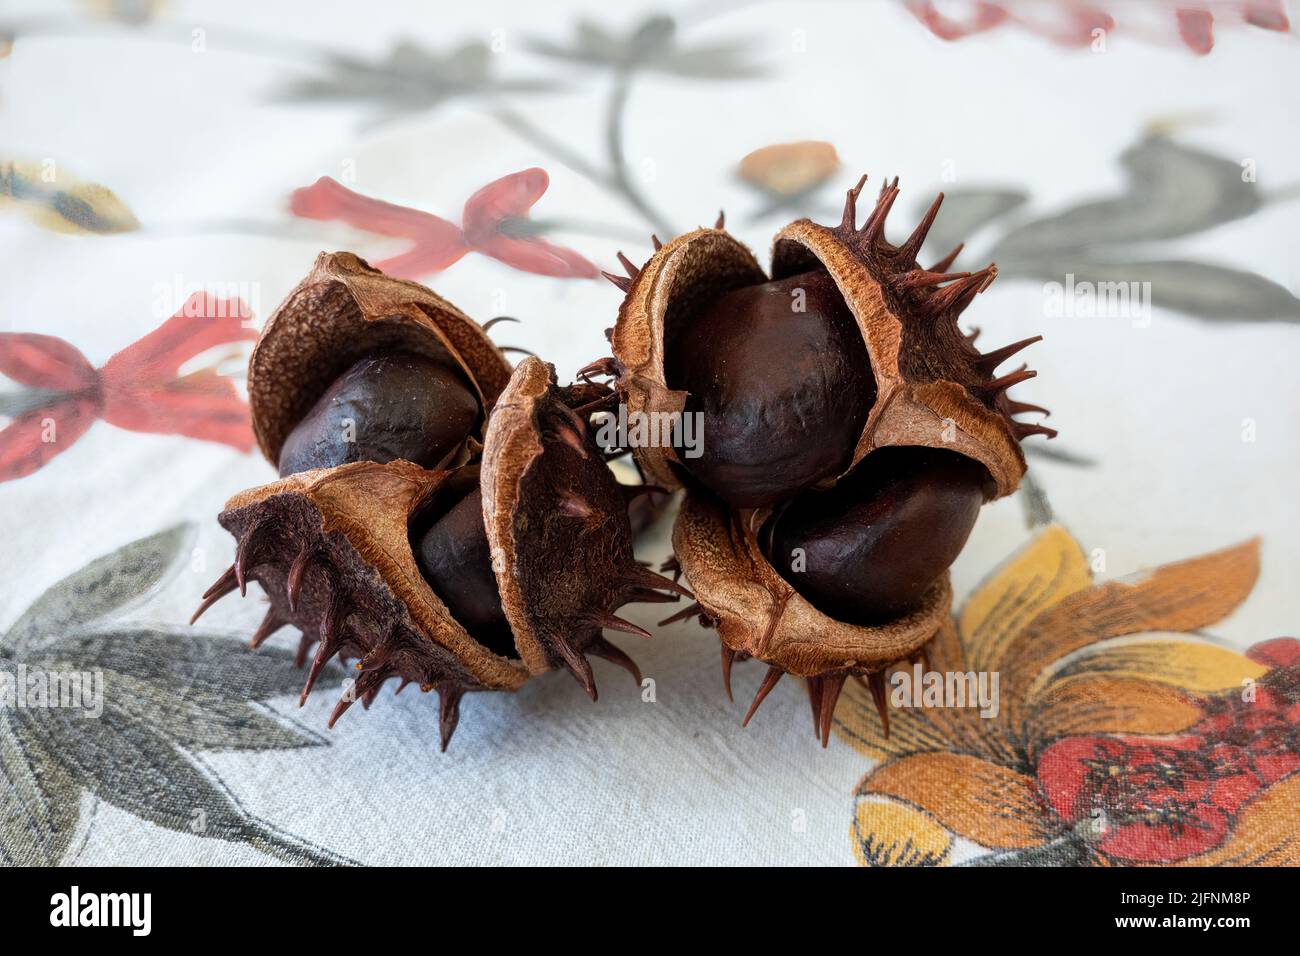 Two chestnuts on an autumn-inspired fabric tablecloth Stock Photo